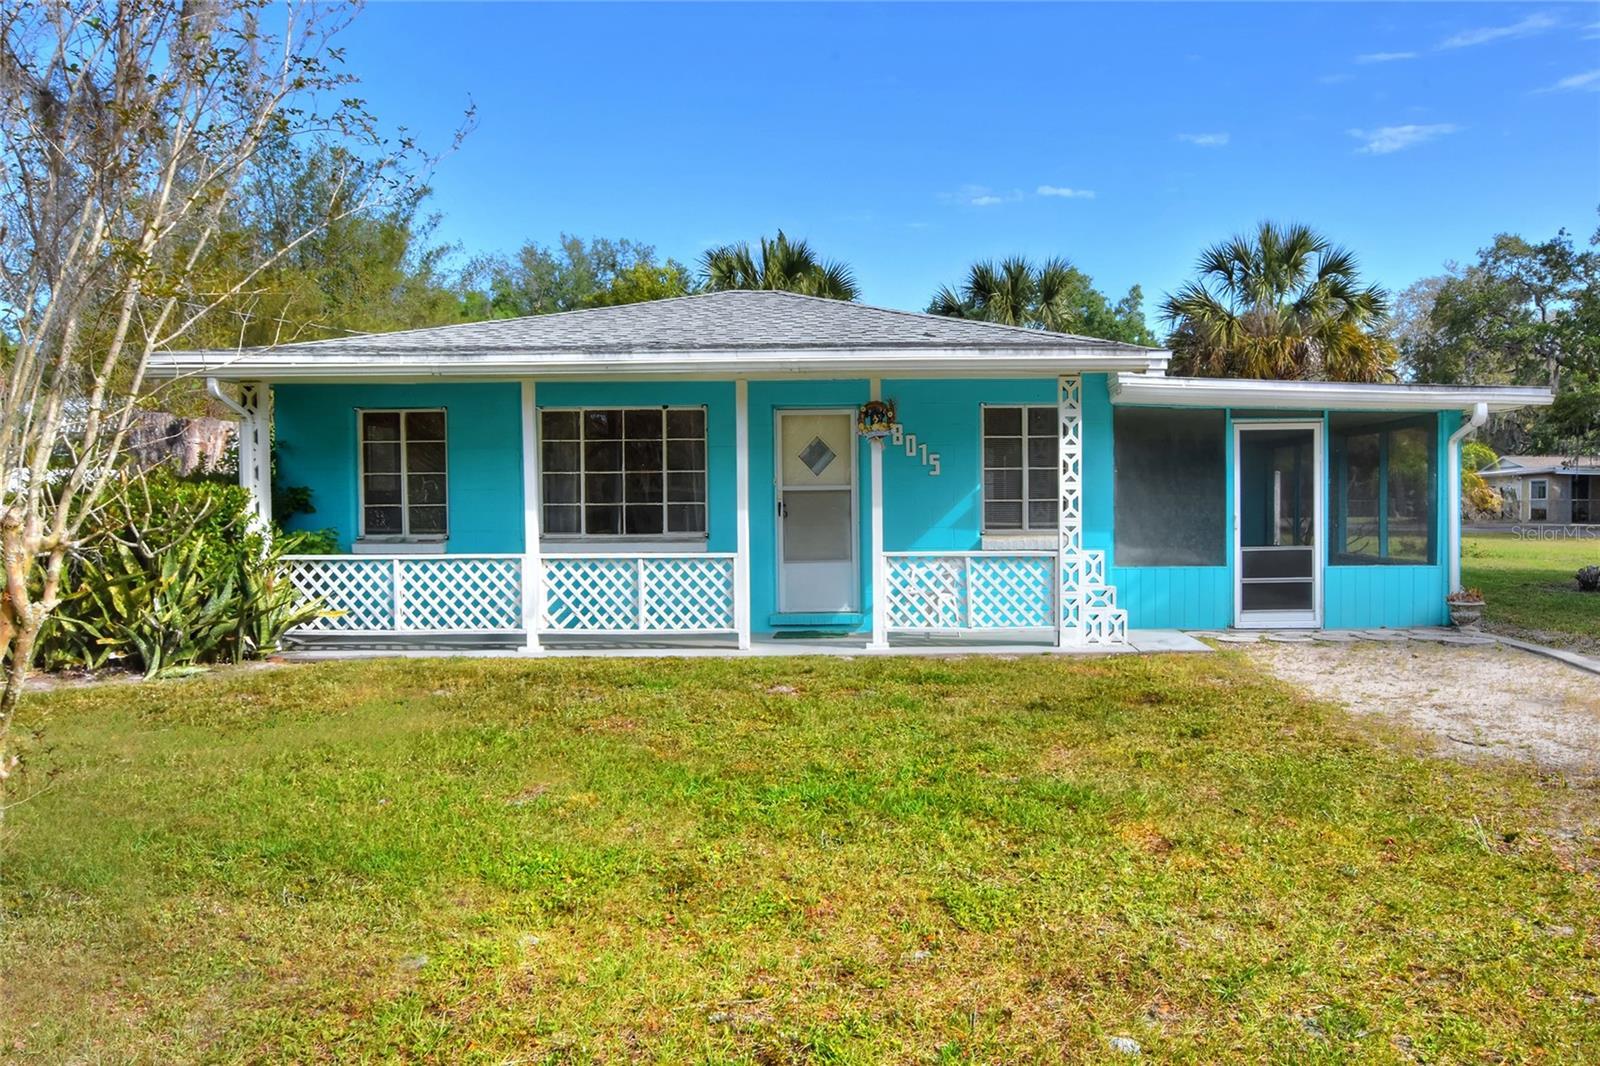 Photo one of 8015 Mays Ave Riverview FL 33578 | MLS T3516252